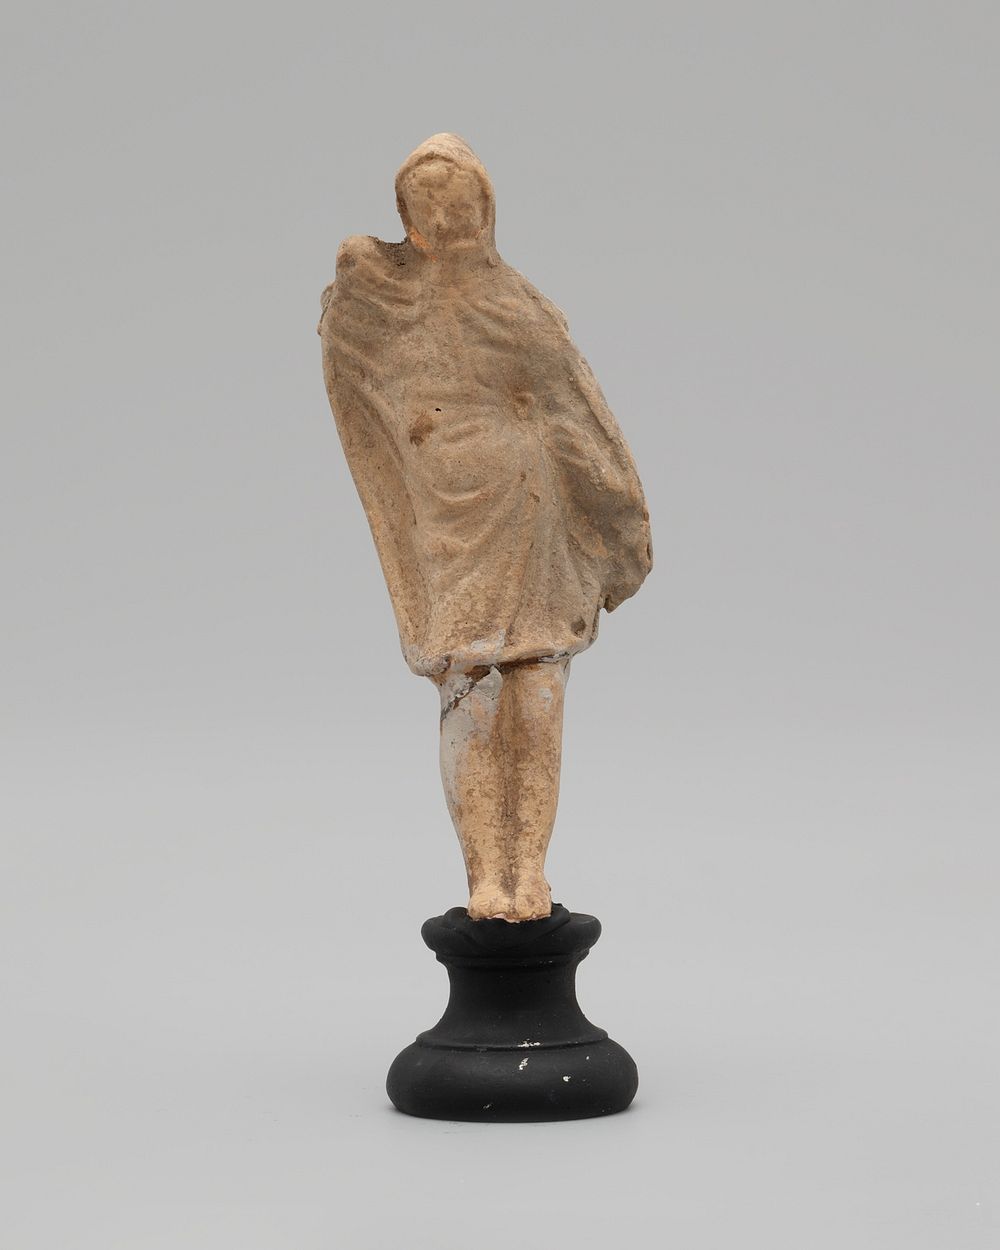 Figurine of a Man by Ancient Greek